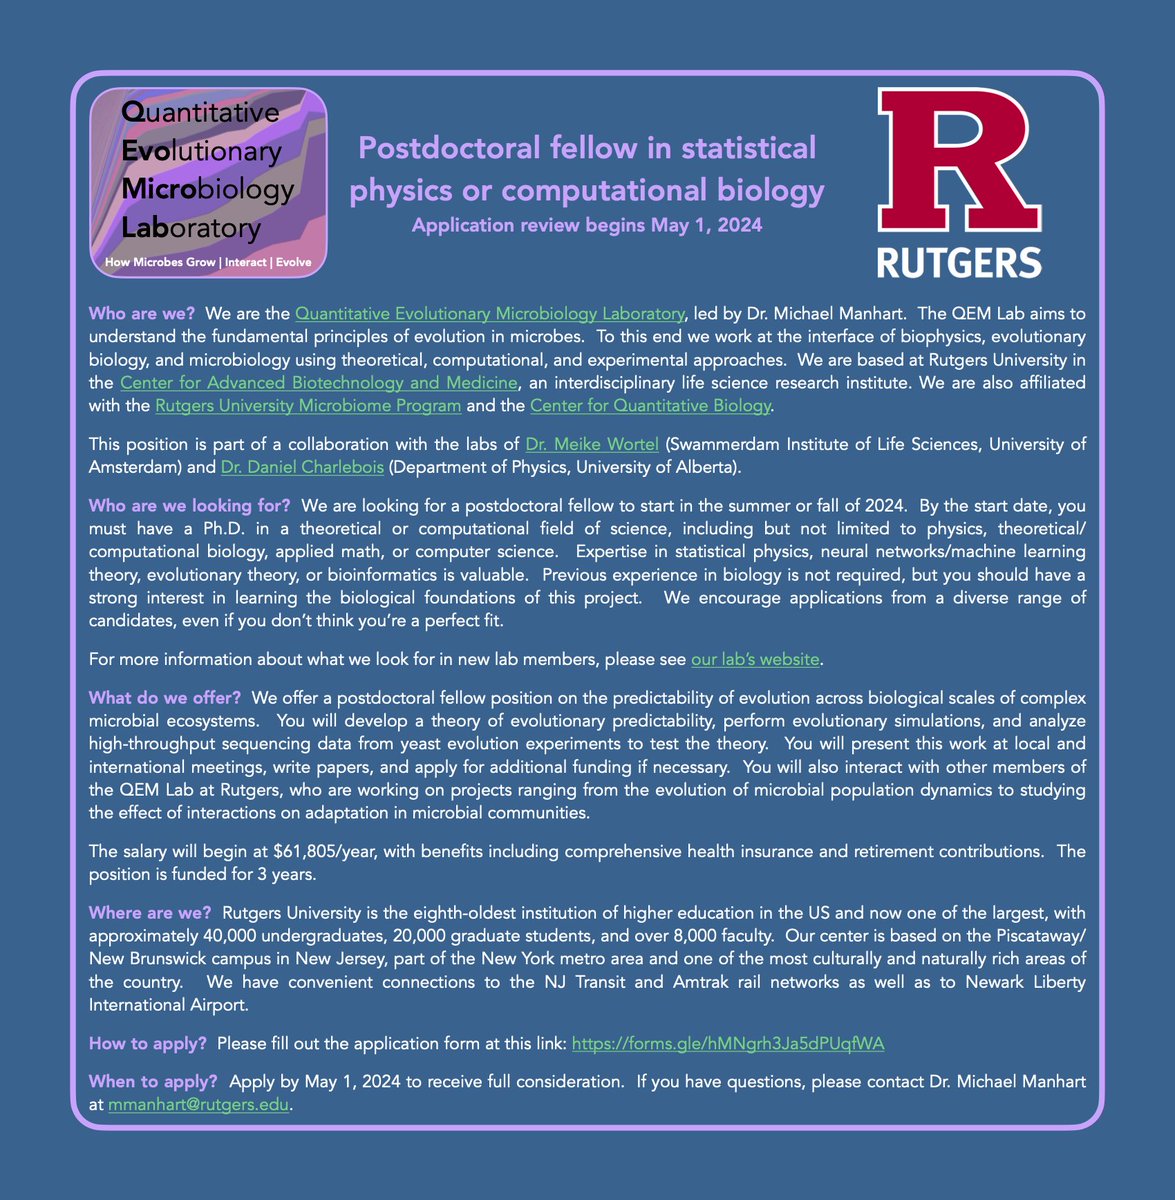 I am recruiting a postdoc in statistical physics, computational biology, or a related field to study the predictability of evolution in microbial communities @RutgersCABM. Please share!
Details: qevomicrolab.org/wp-content/upl…
Apply by May 1 here: forms.gle/hMNgrh3Ja5dPUq…